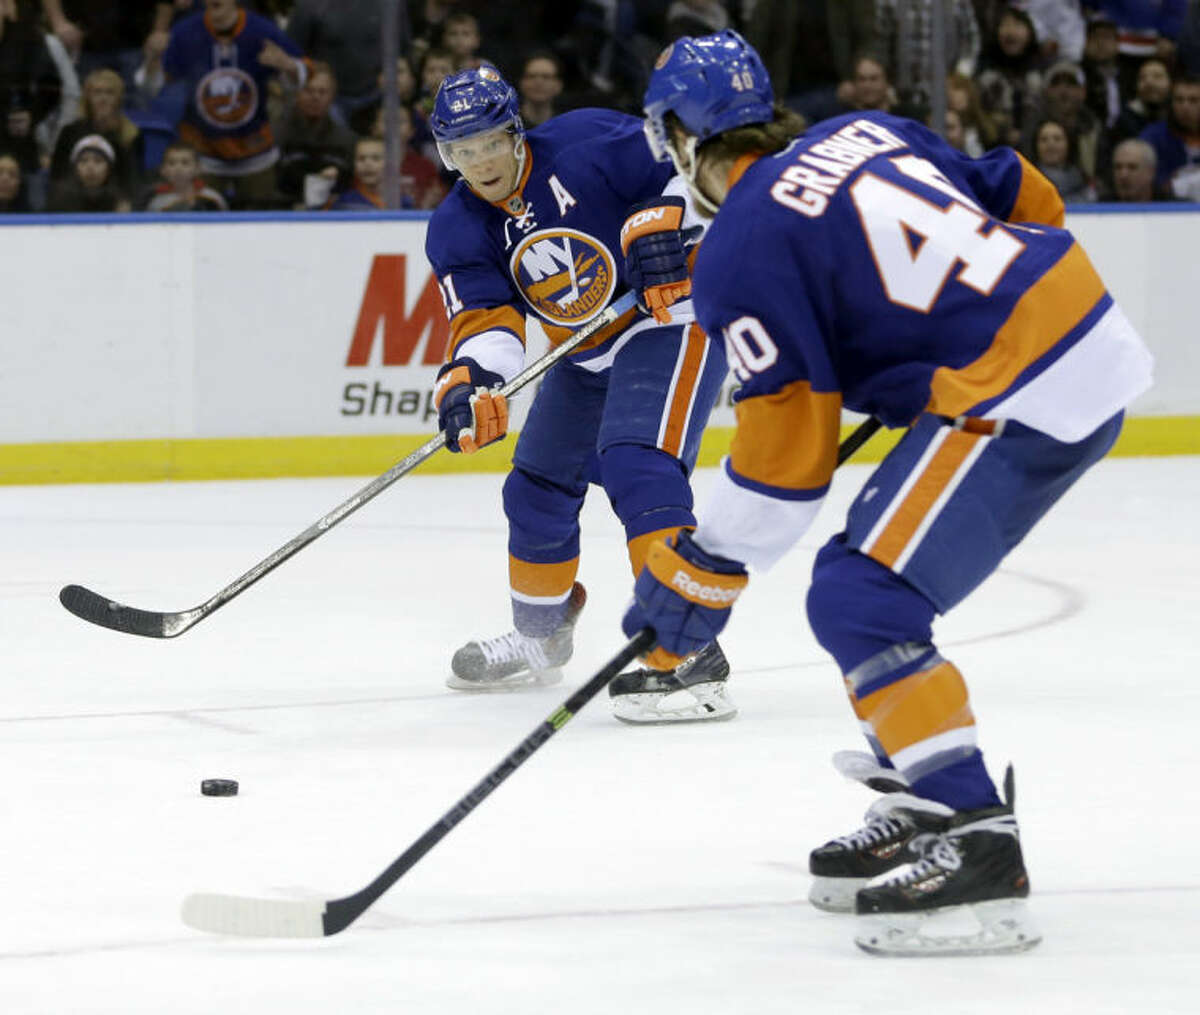 New York Islanders' Kyle Okposo, left, passes to Michael Grabner before scoring during the second period of the NHL hockey game against the Boston Bruins, Monday, Jan. 27, 2014, in Uniondale, New York. (AP Photo/Seth Wenig)